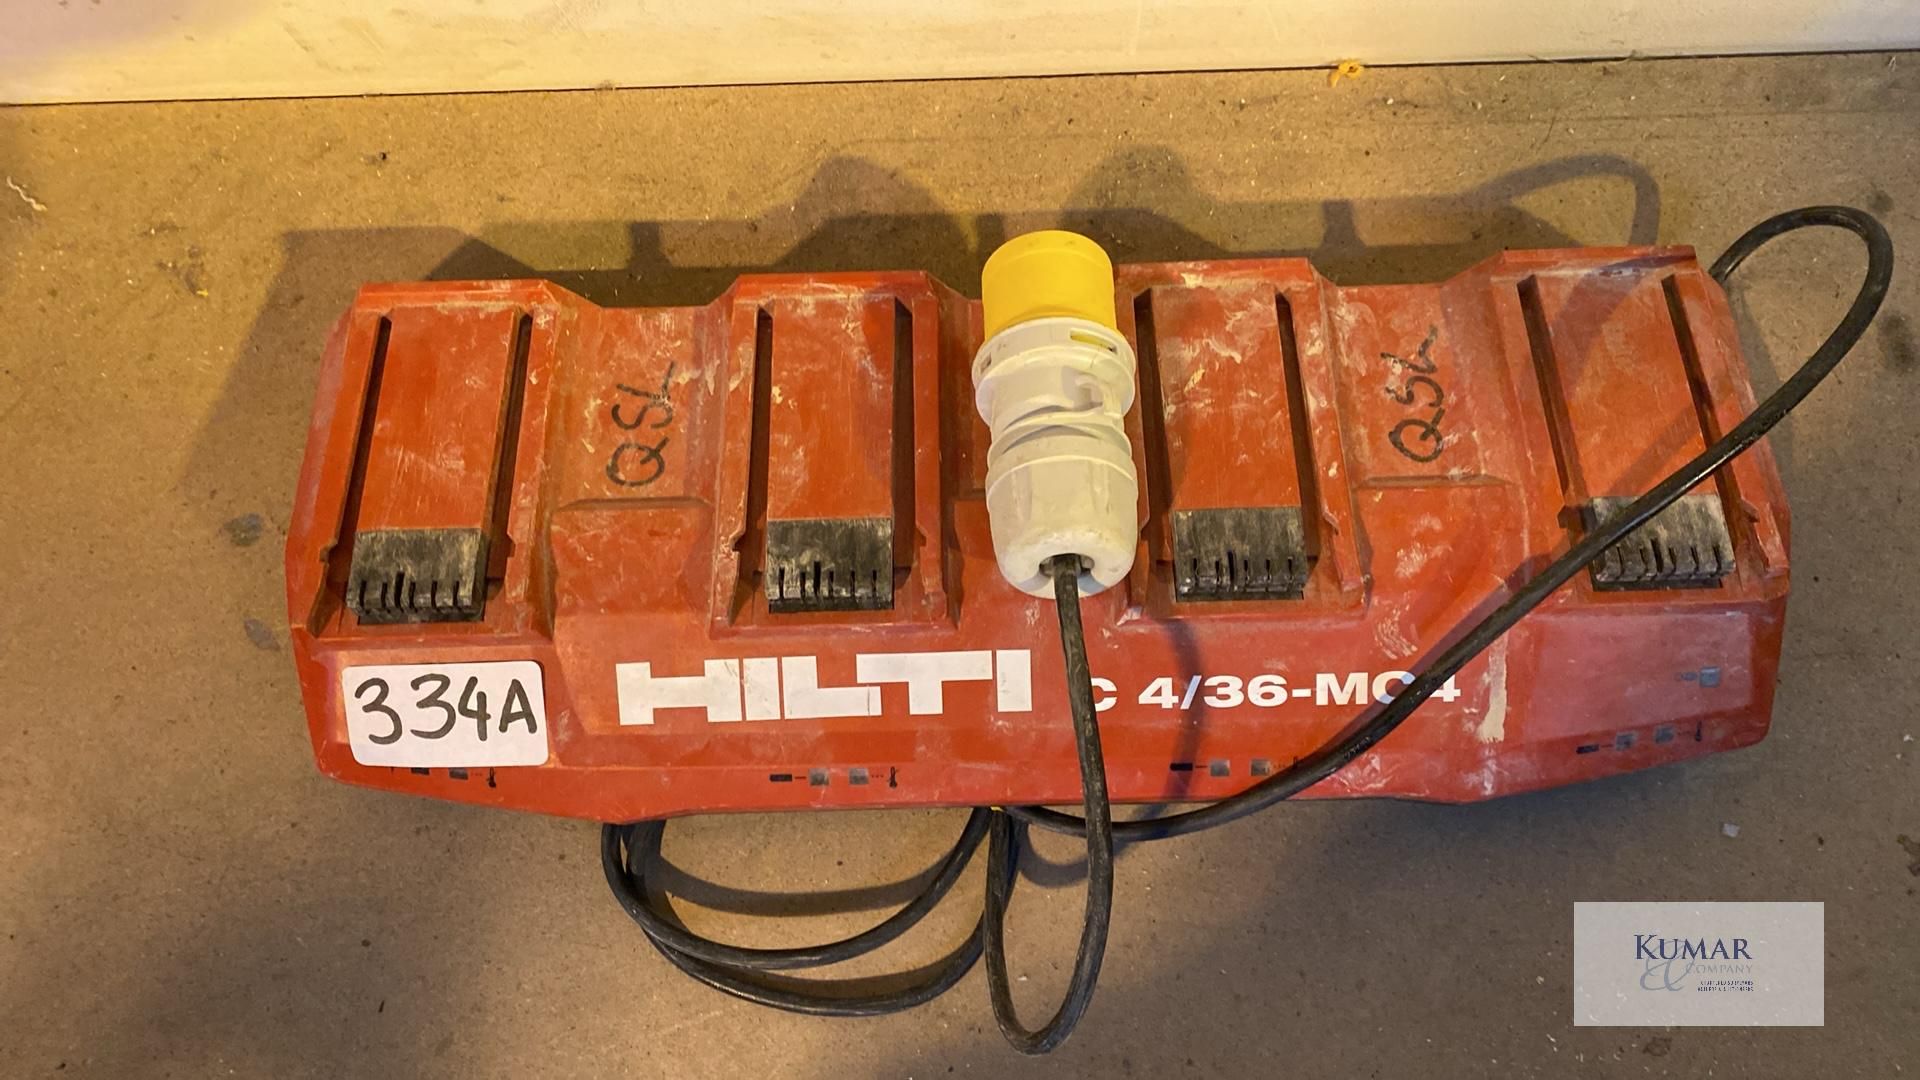 Hilti C4/36-MC4 Multi Bay 110 Volt Battery Charger, Serial No.120390025 (2019) - Image 2 of 3